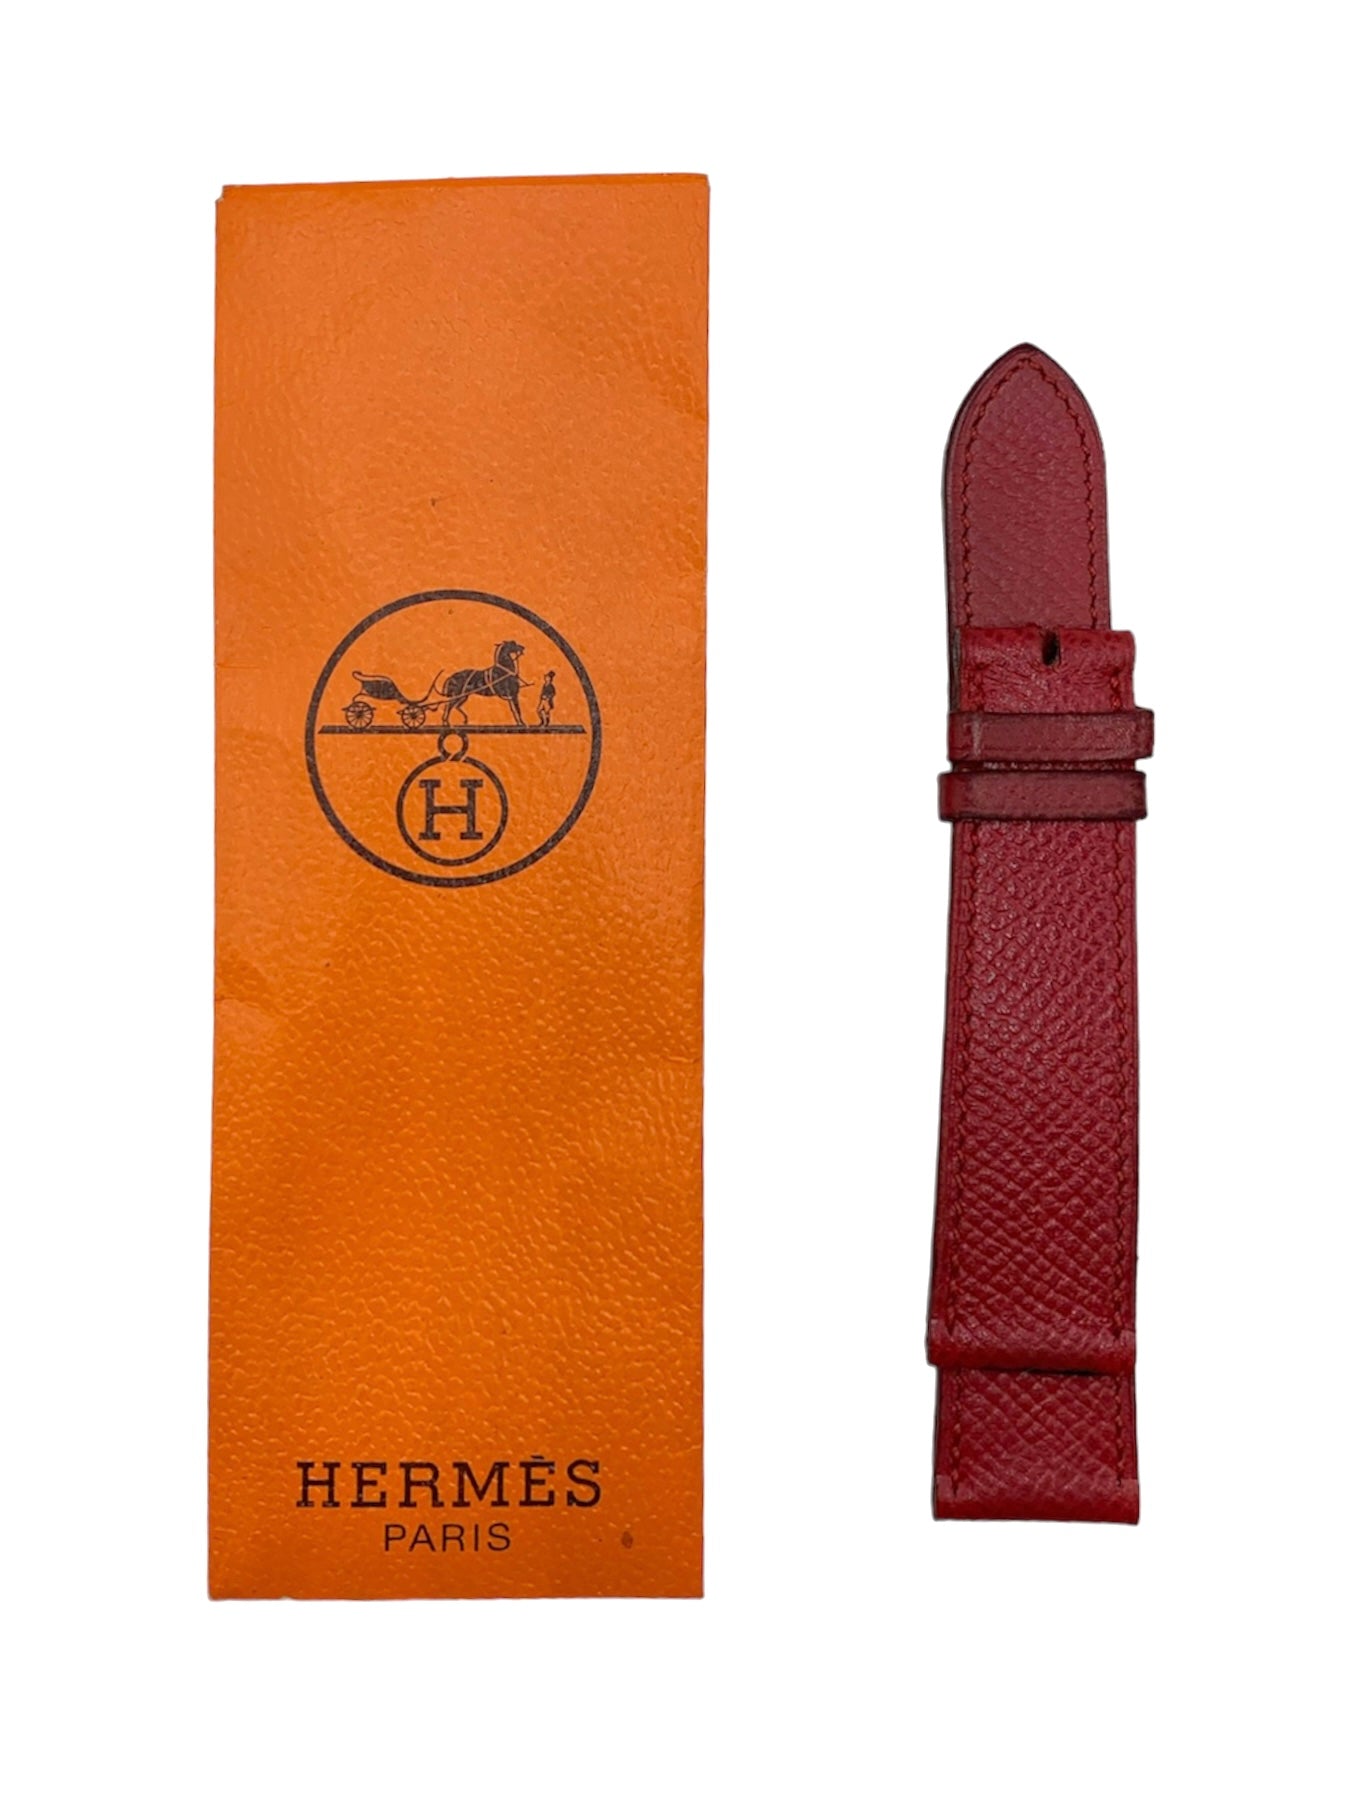 Classic Contemporary Hermes Logo Watch with Interchangable Red Band ENVELOPE 6 of 7